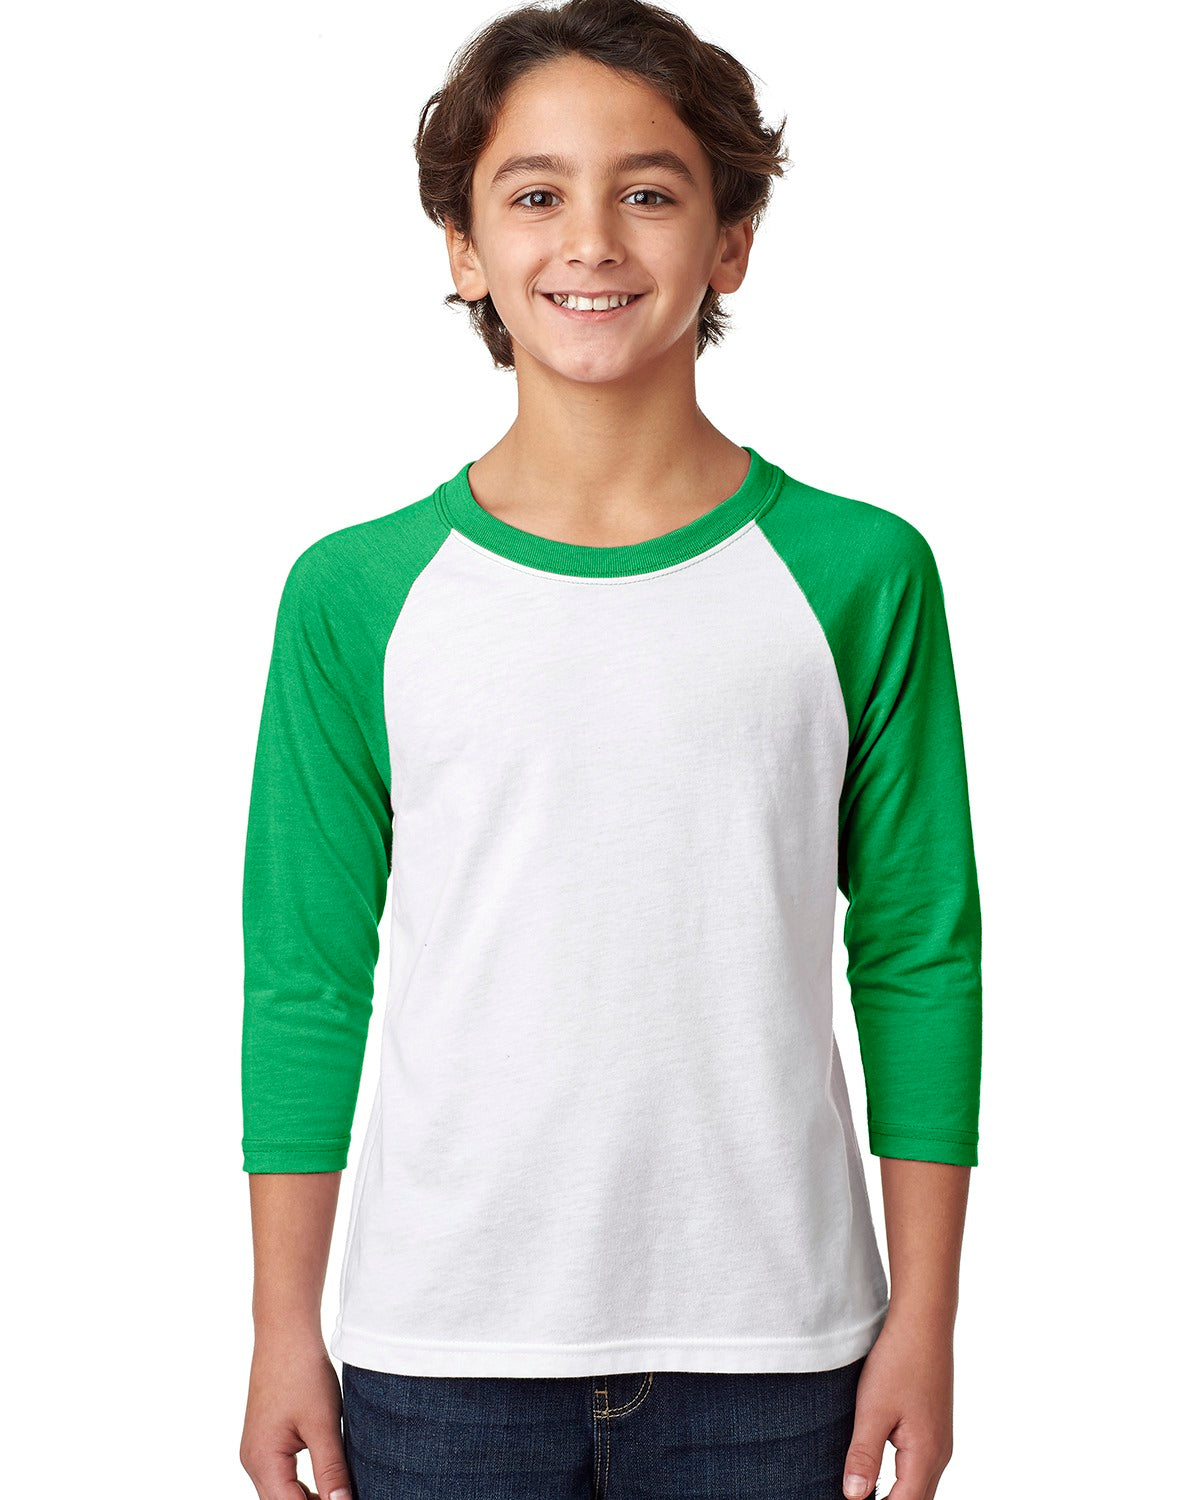 child model wearing next level youth 3/4 sleeve raglan tee in kelly white